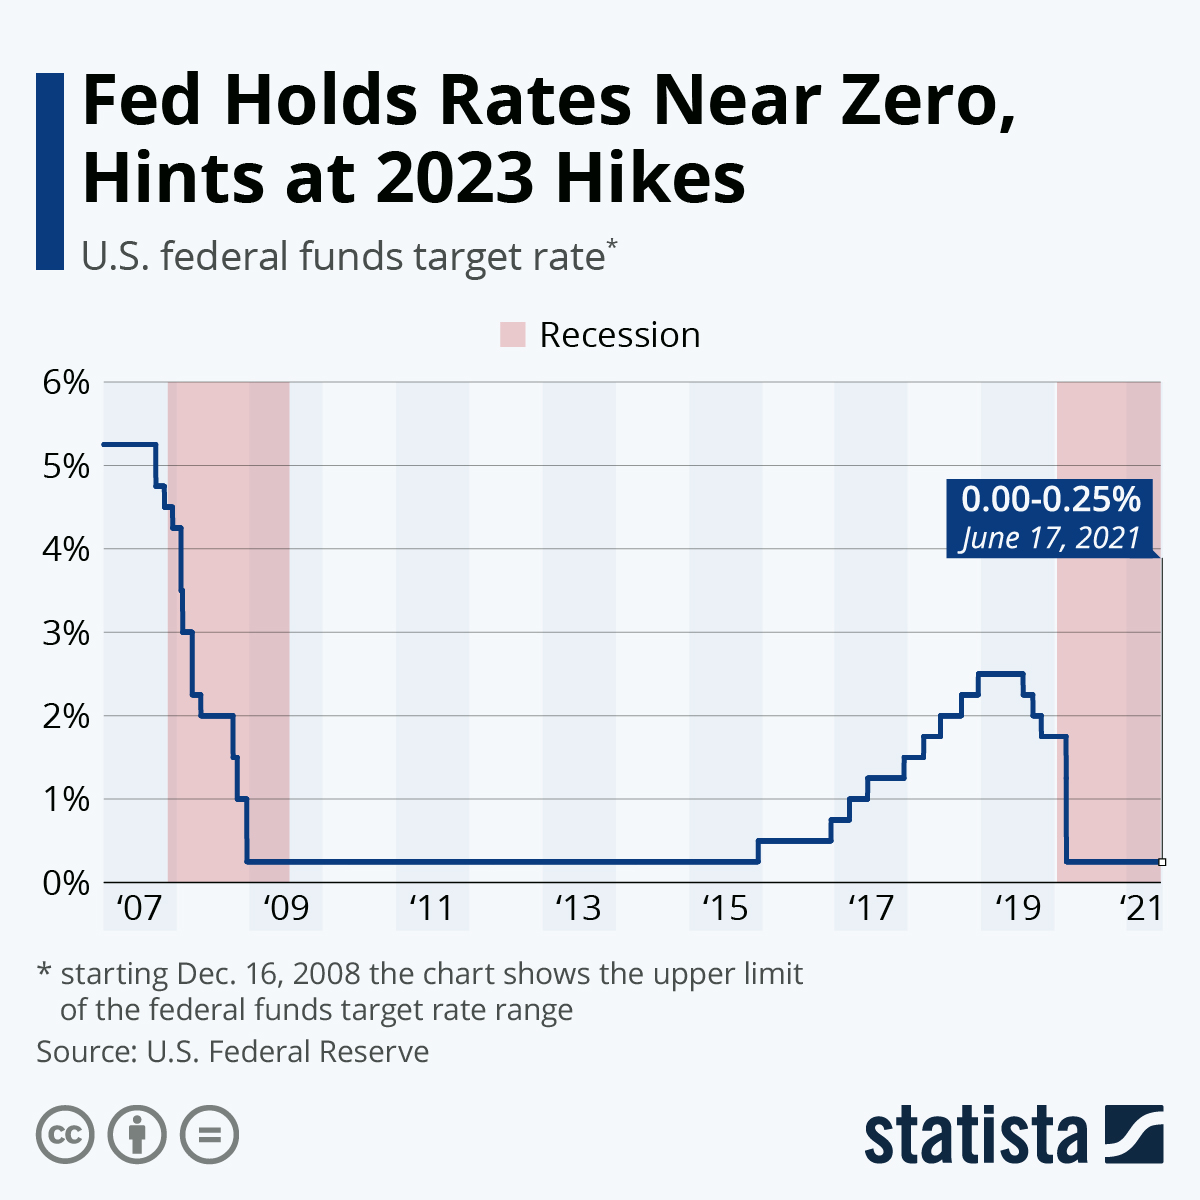 Fed Holds Rates Near Zero, Hints at 2023 Hikes